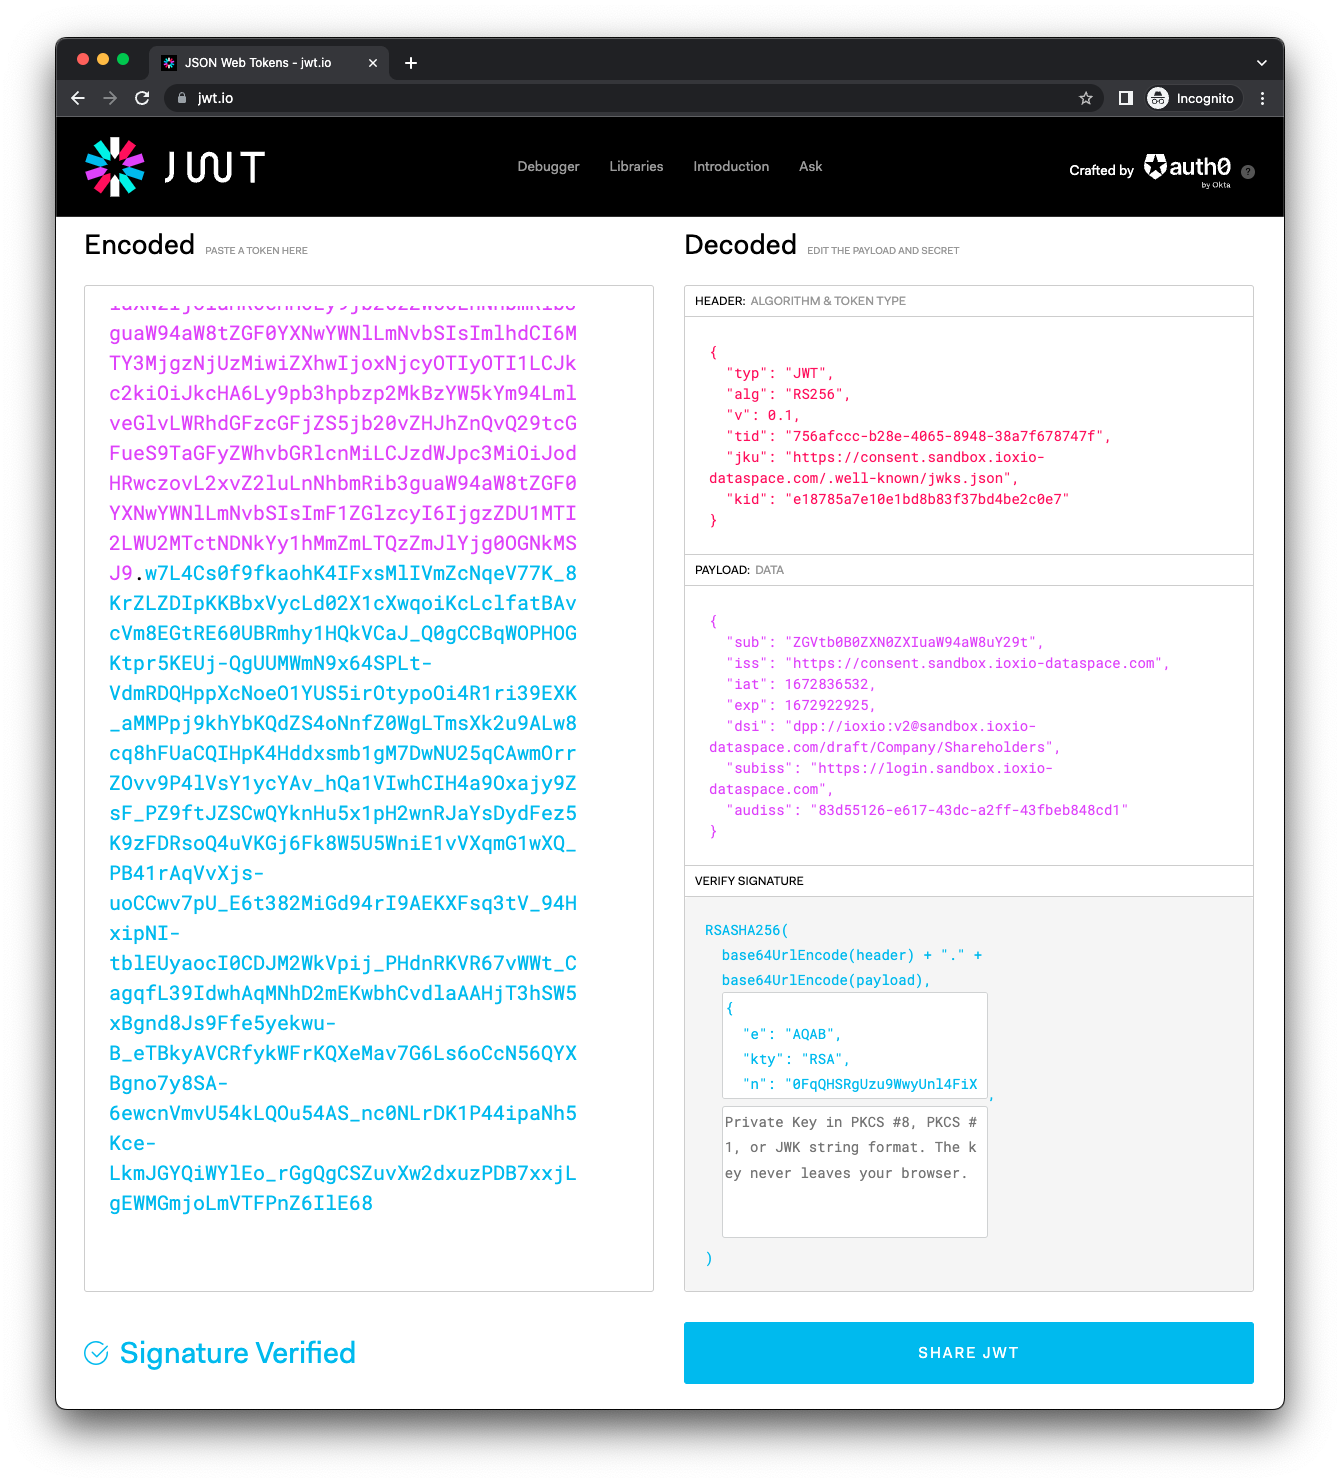 Screenshot of the consent token when viewed at jwt.io